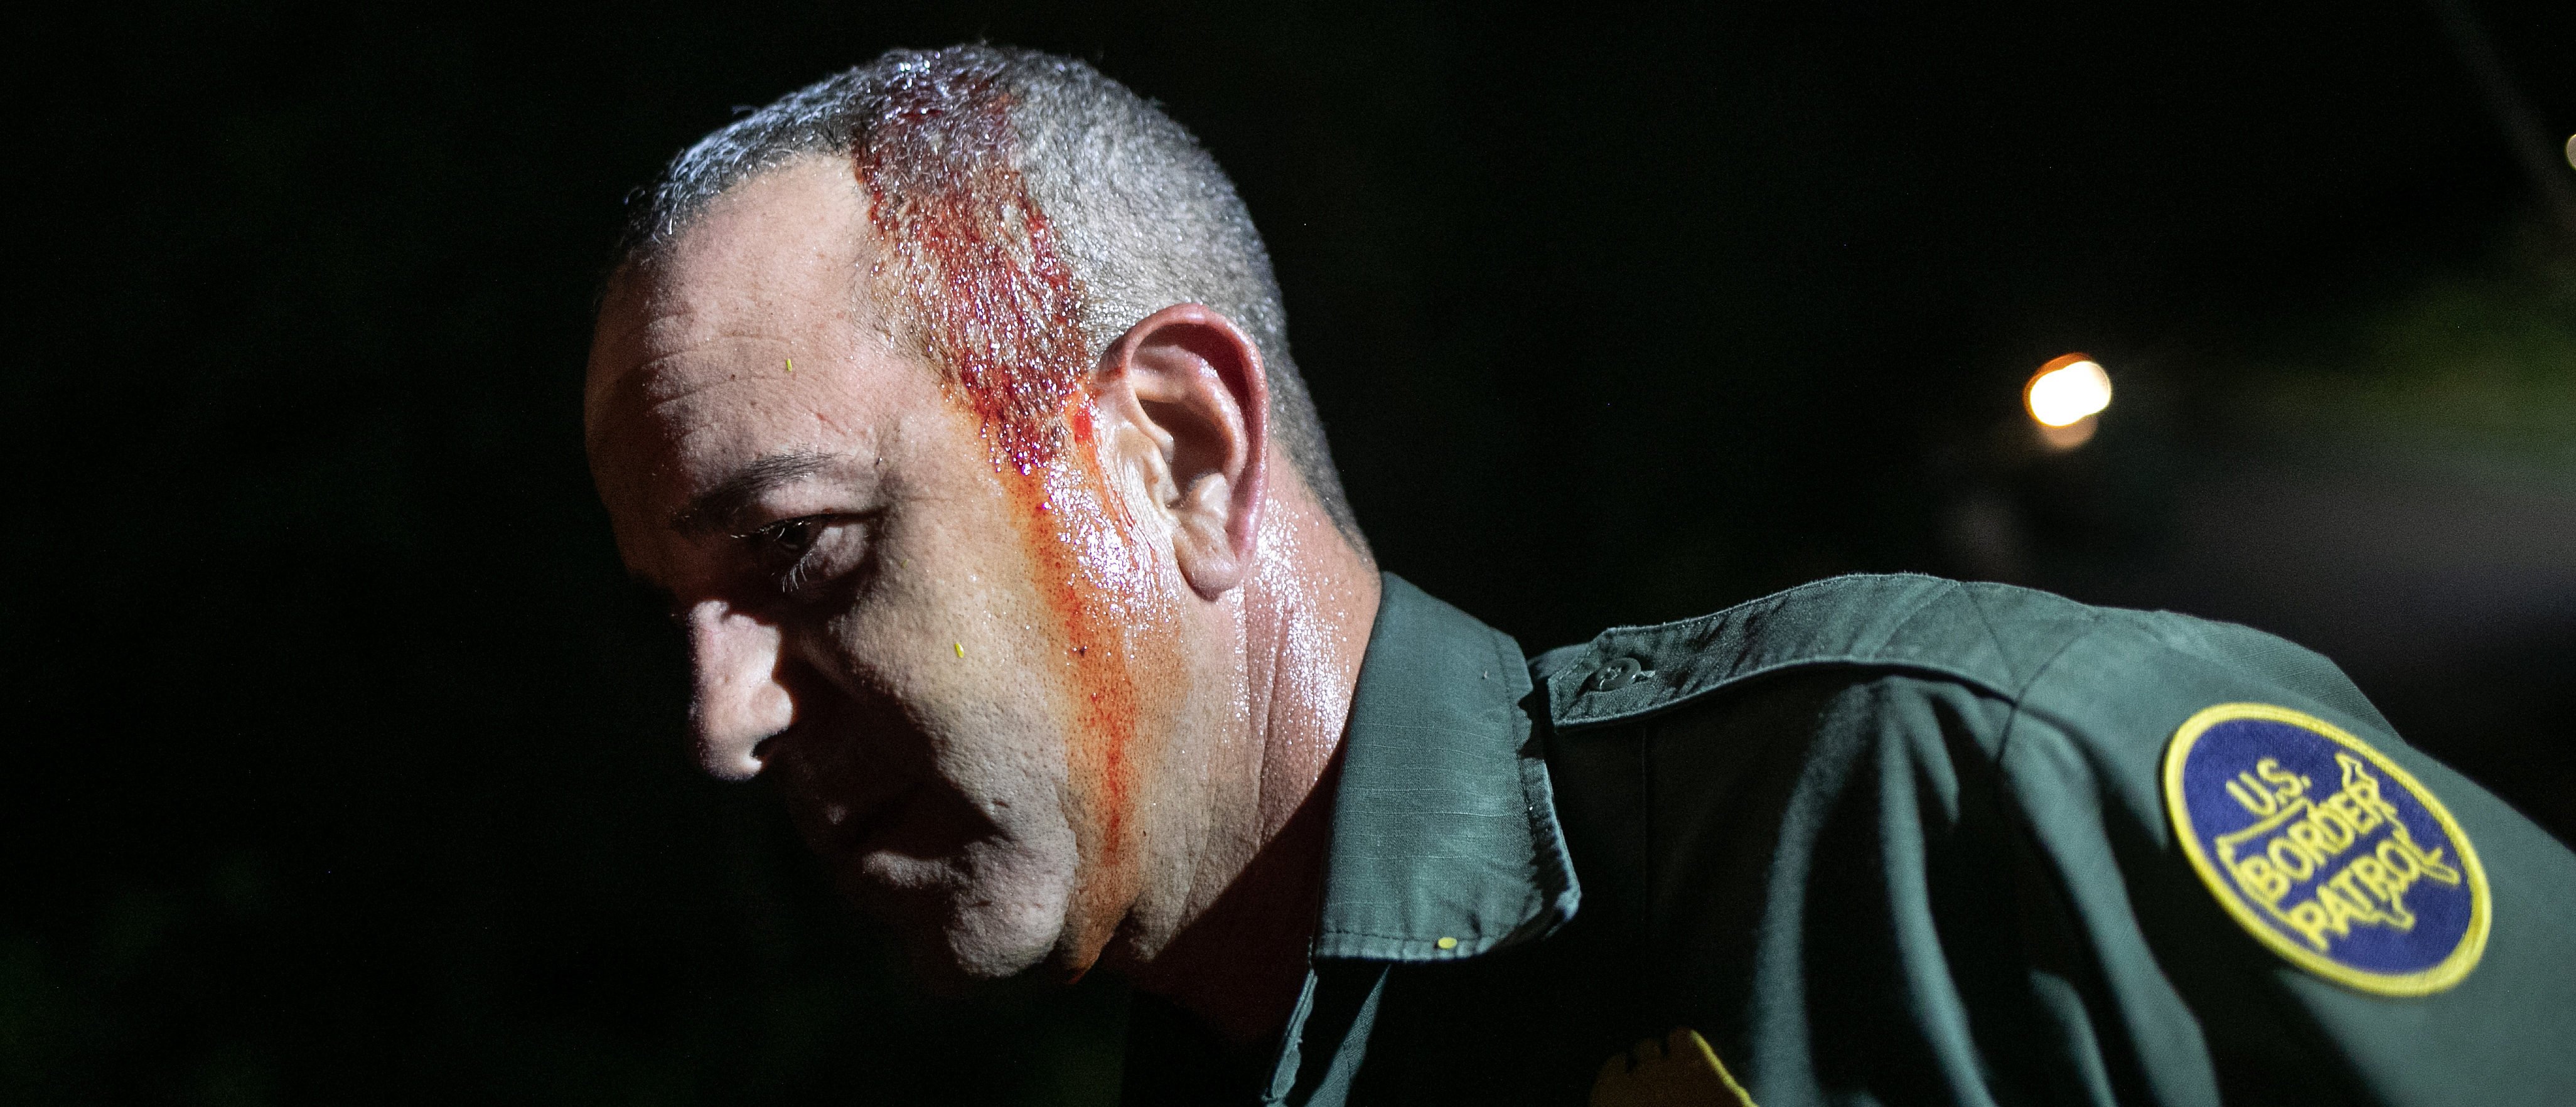 MISSION, TEXAS - SEPTEMBER 10: U.S. Border Patrol agent Carlos Ruiz bleeds from a light head wound after chasing undocumented immigrants through the woods on September 10, 2019 in Mission, Texas. Ruiz said he was hit by a branch while he was pursuing a group that had crossed the Rio Grande from Mexico into Texas earlier in the day. (Photo by John Moore/Getty Images)